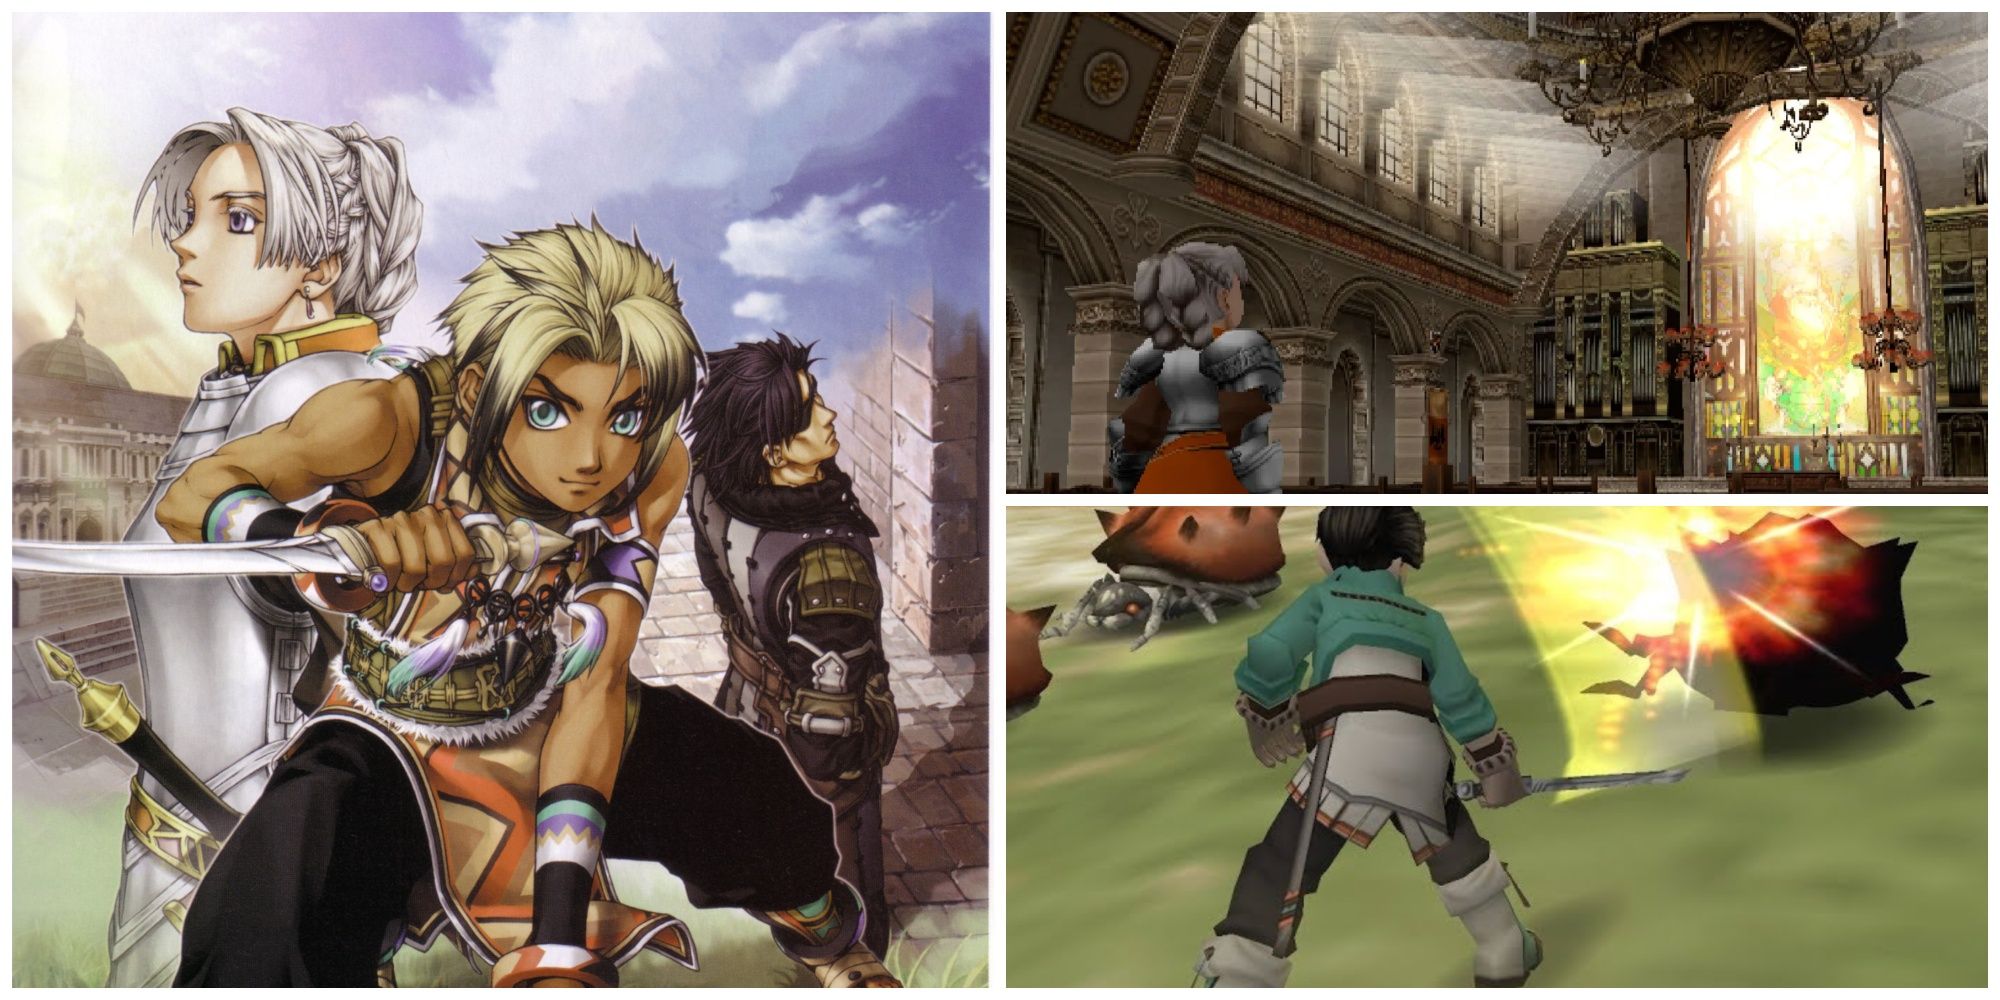 Suikoden 3 collage